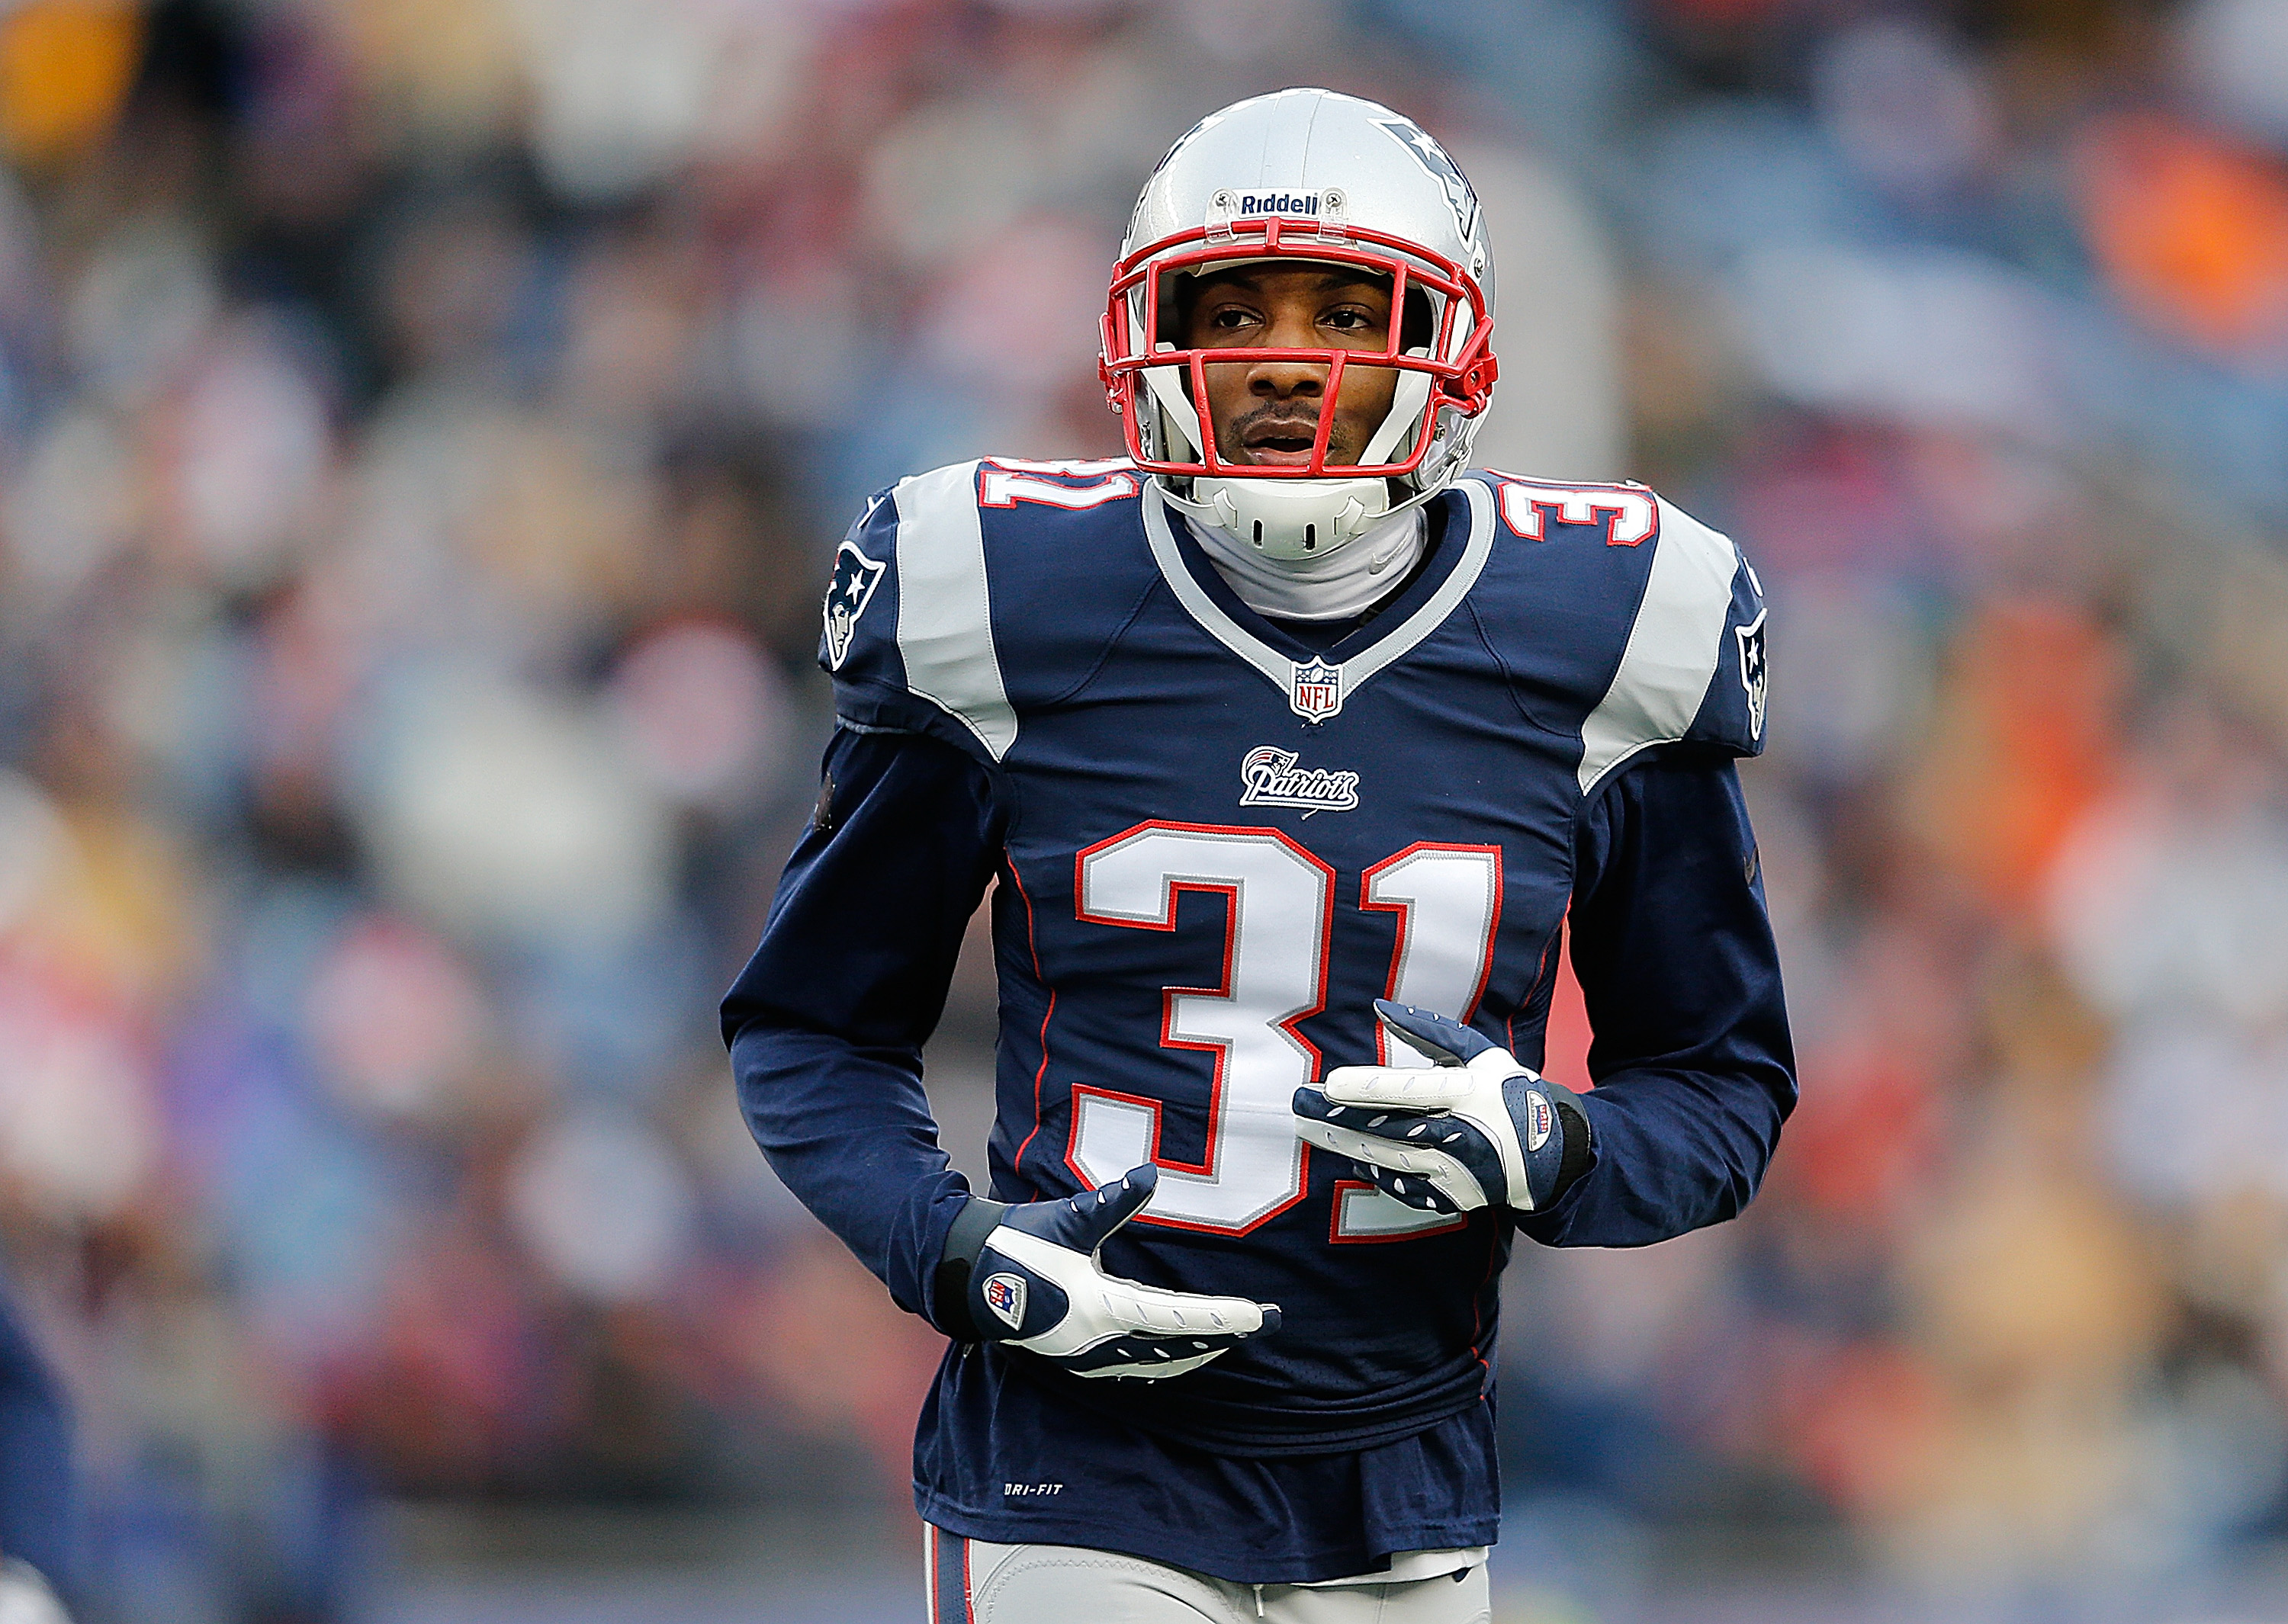 FOXBORO, MA - DECEMBER 8: Aqib Talib #31 of the New England Patriots looks on during a game with Cleveland Browns at Gillette Stadium on December 8, 2013 in Foxboro, Massachusetts. (Photo by Jim Rogash/Getty Images)